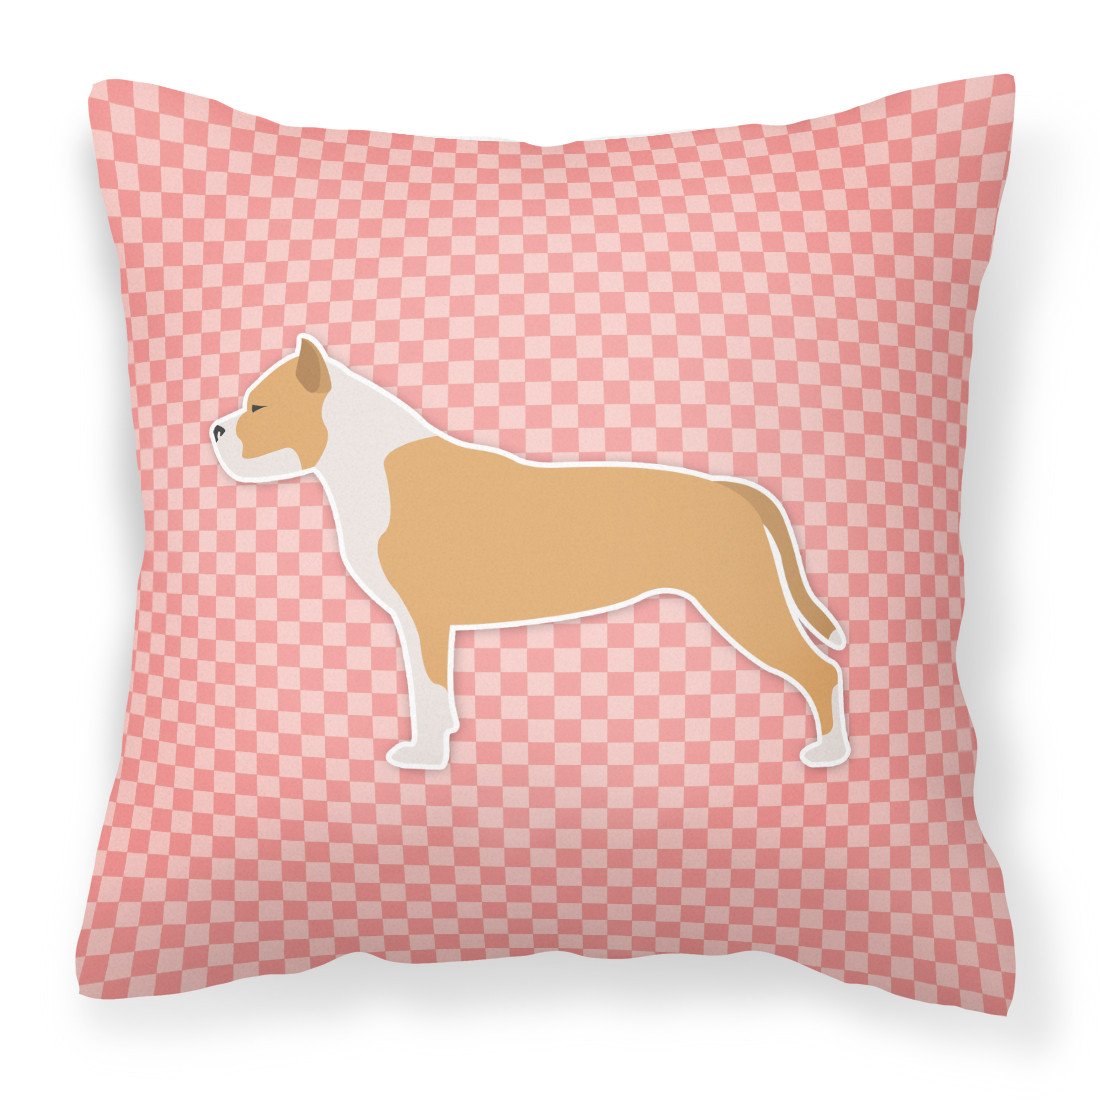 Staffordshire Bull Terrier Checkerboard Pink Fabric Decorative Pillow BB3654PW1818 by Caroline's Treasures